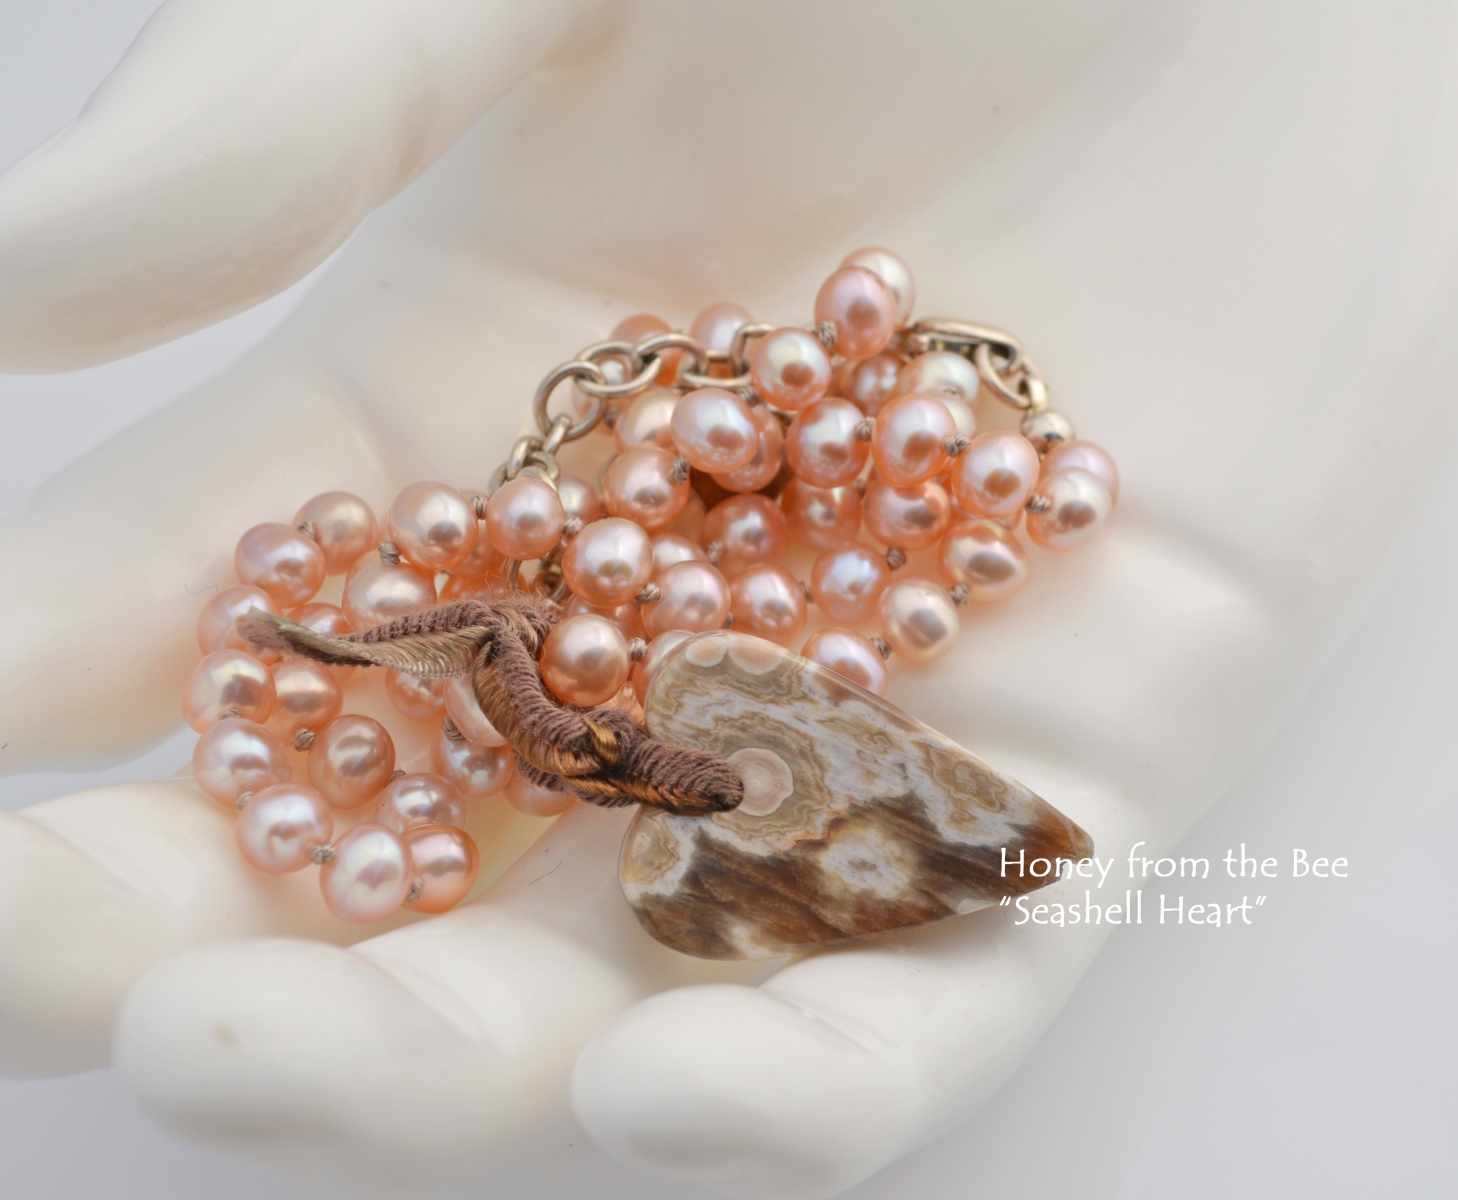 Ocean Jasper heart and pearl necklace by Honey from the Bee